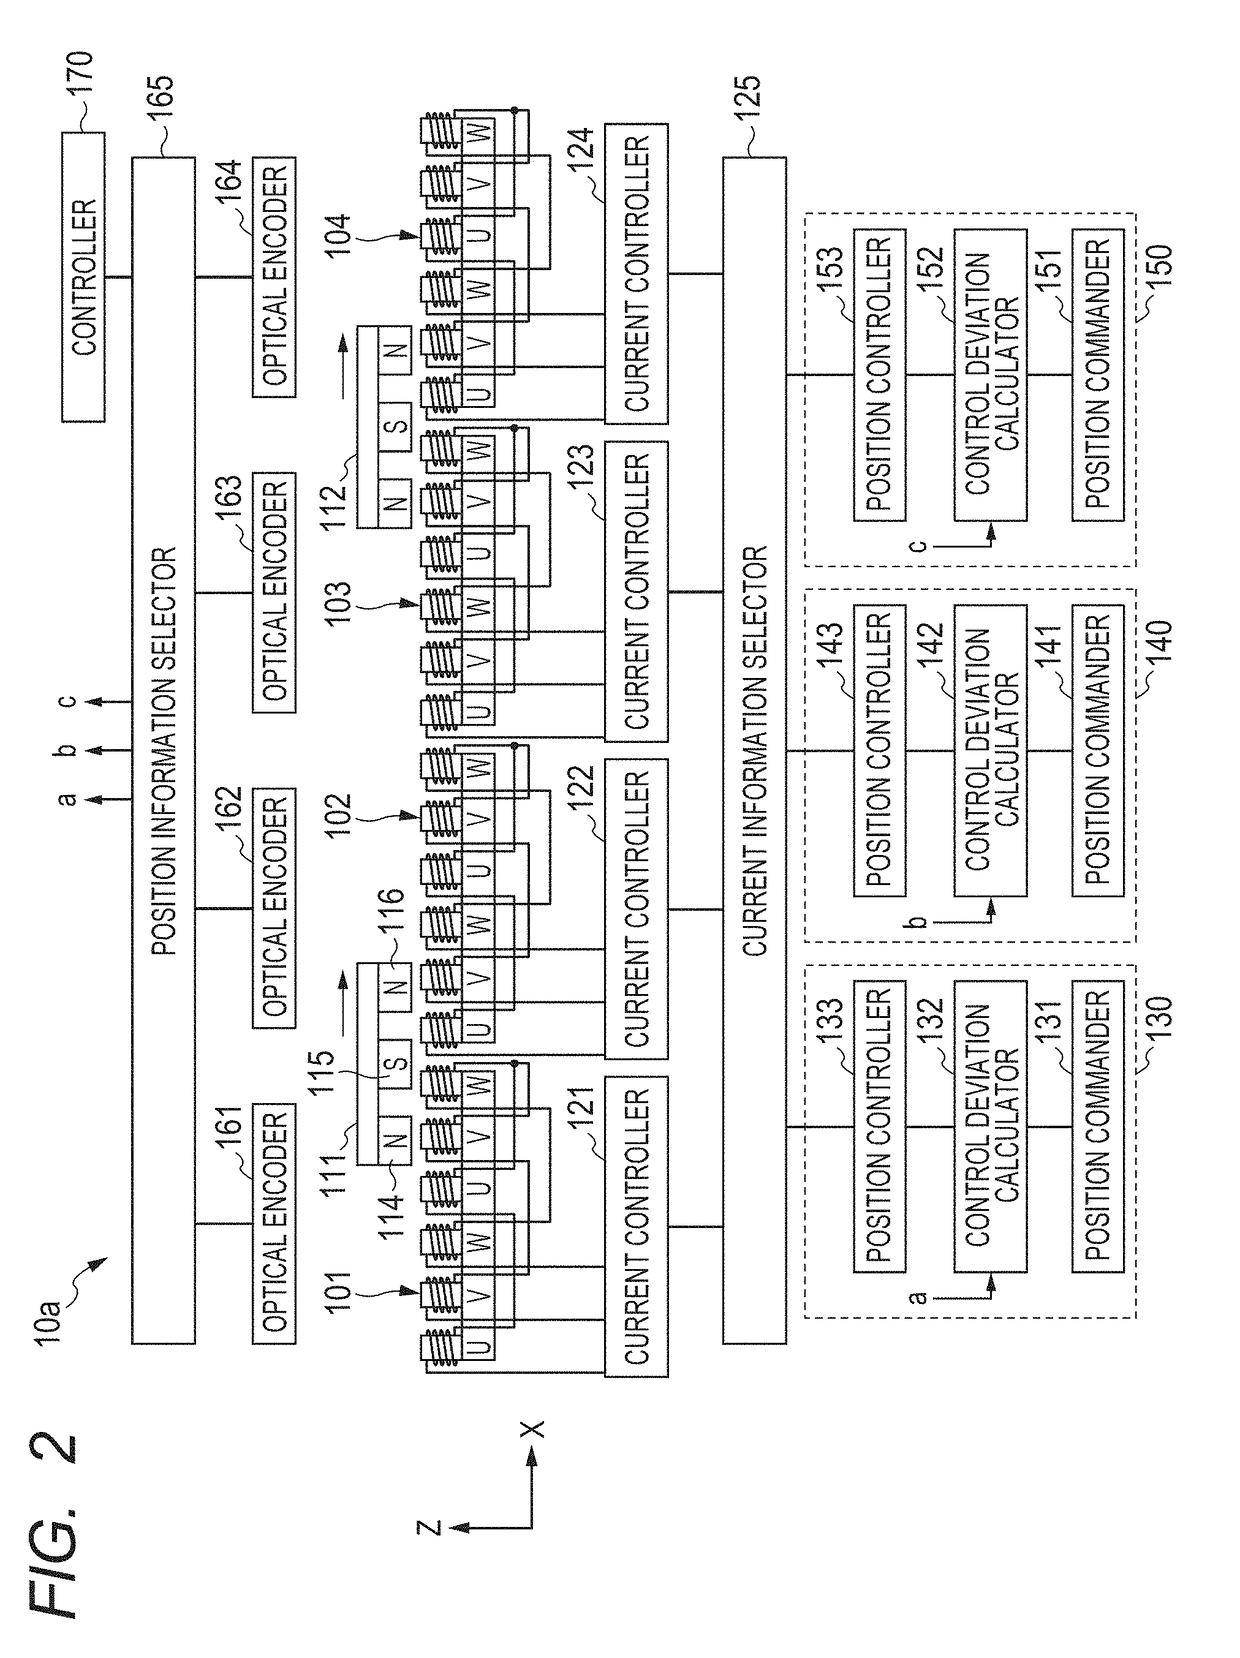 Linear motor control apparatus and linear motor control system